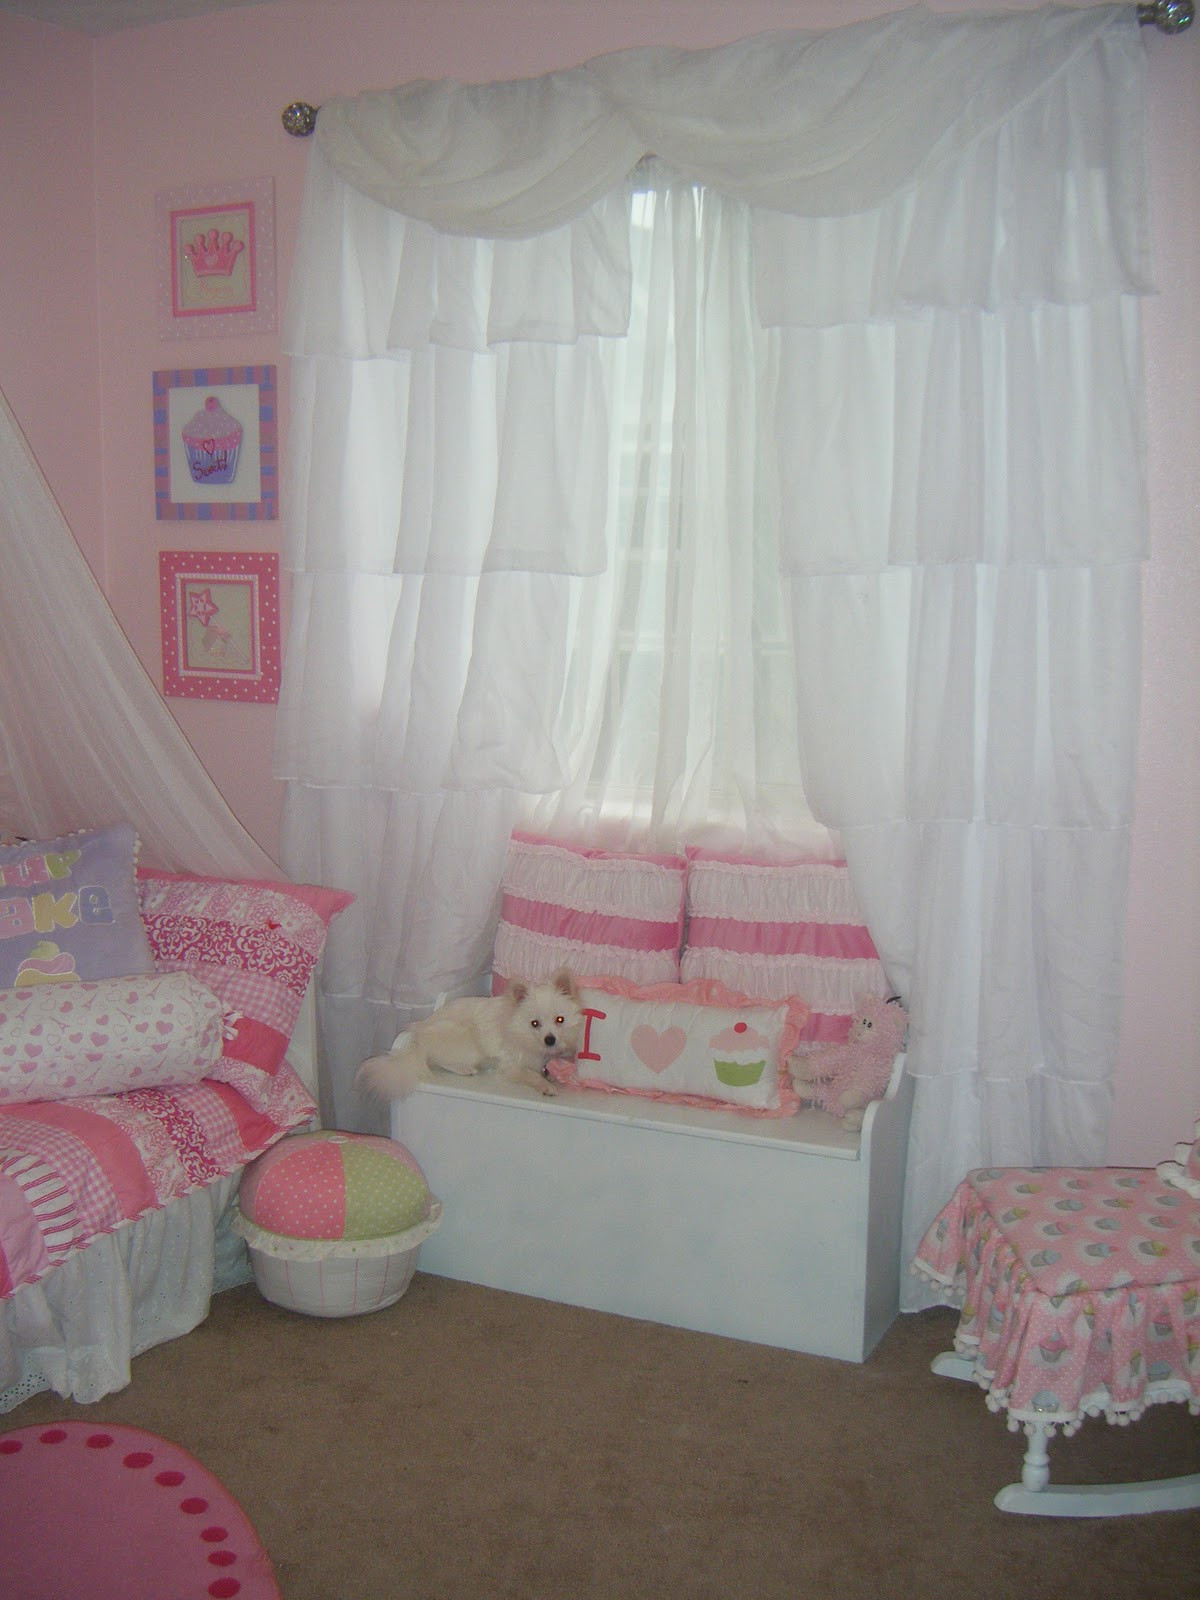 Shabby Chic Bedroom Curtains
 Not So Shabby Shabby Chic Curtain s for Bella s room